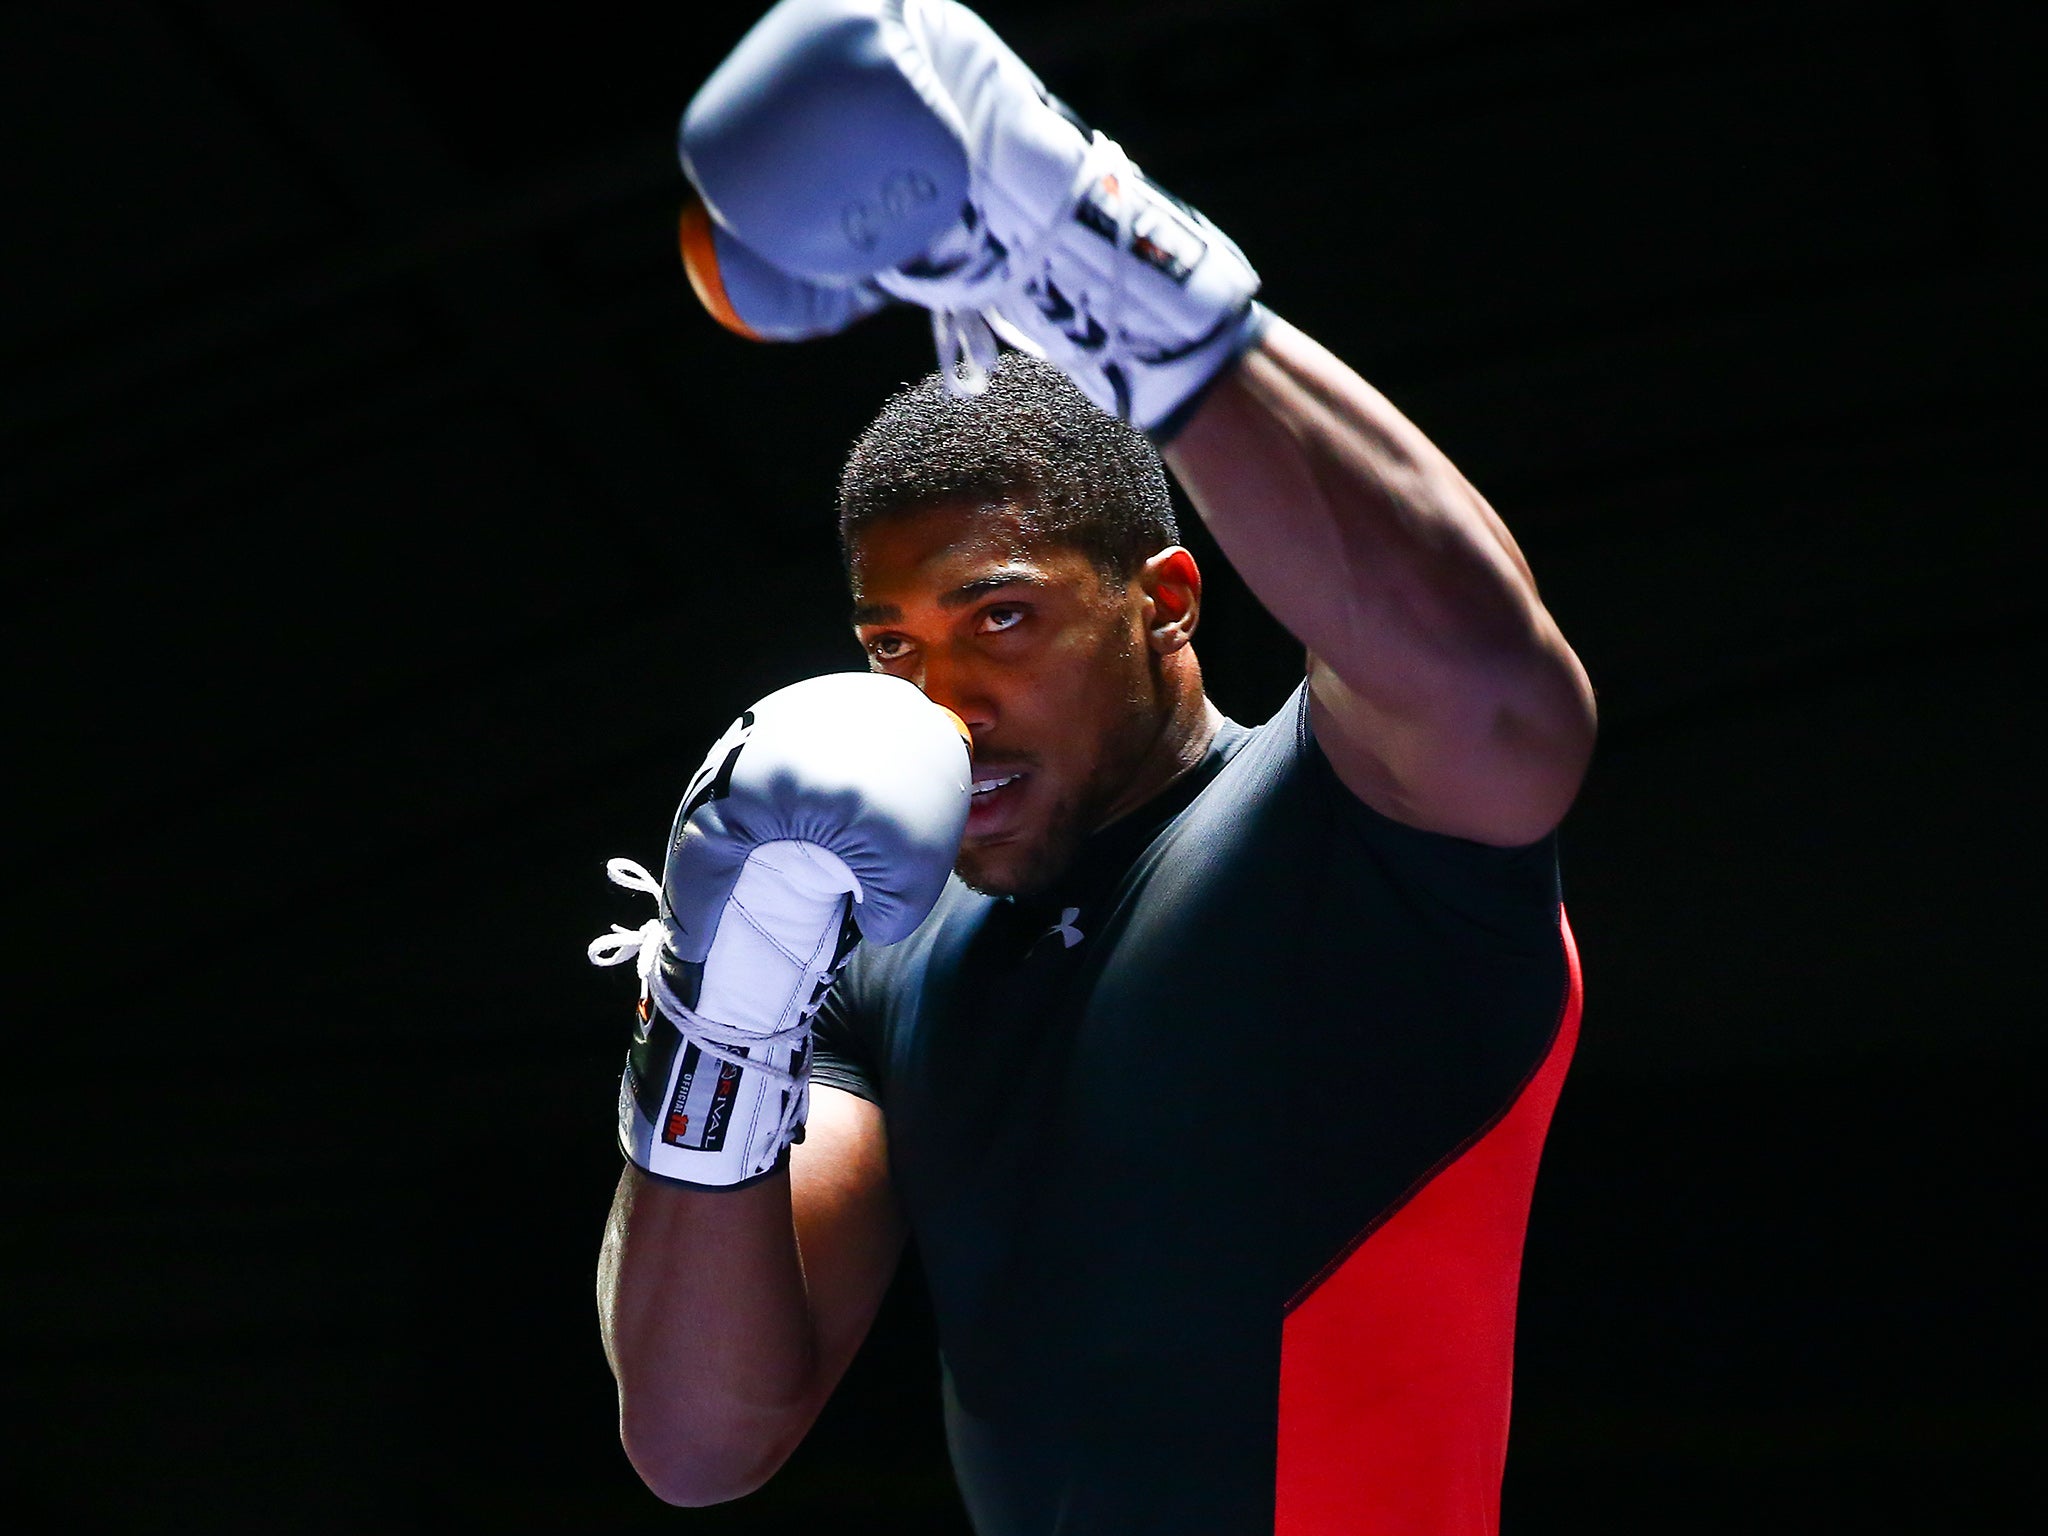 Anthony Joshua during his open training session this week